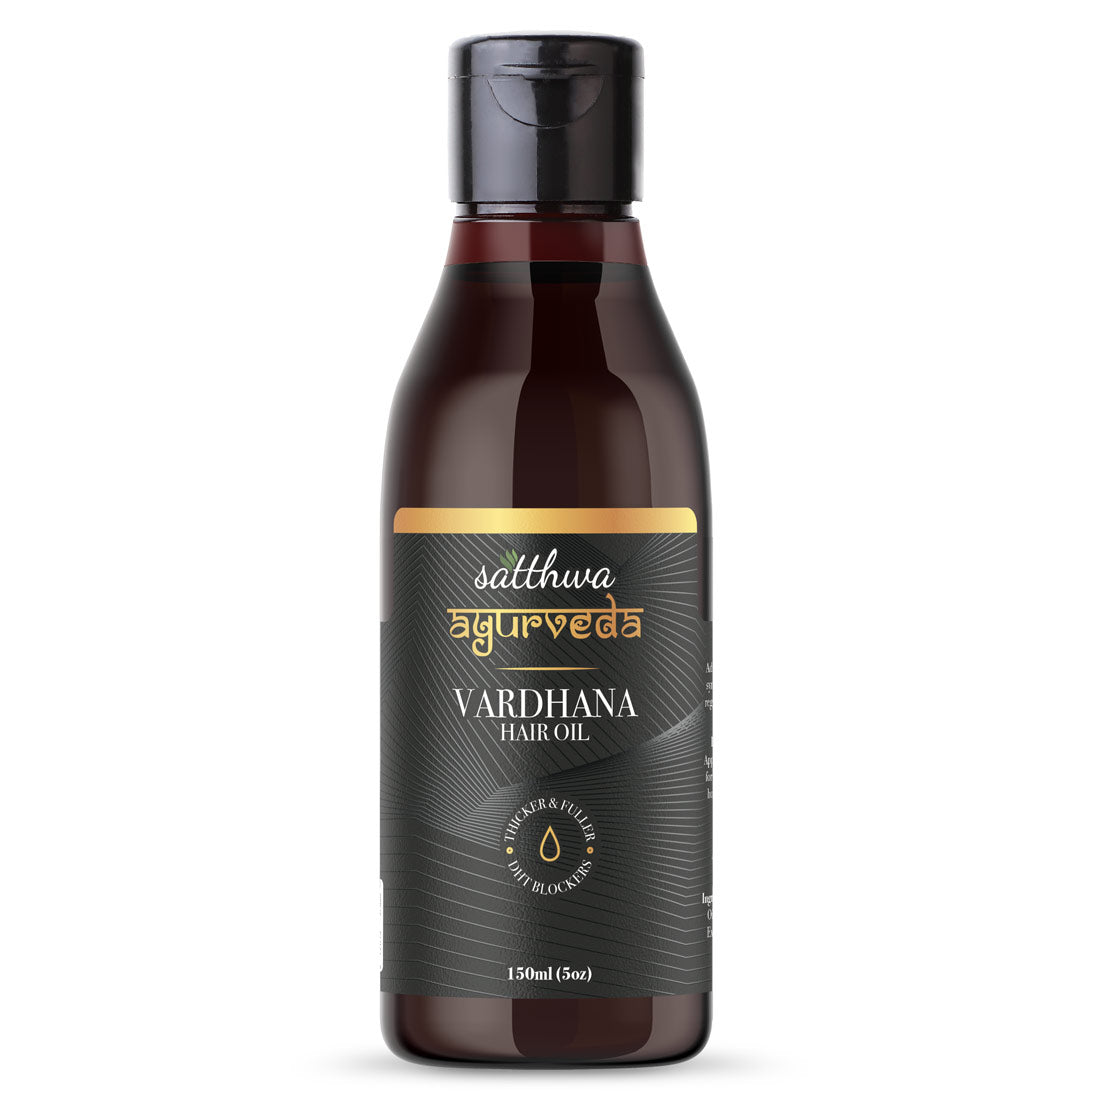 Satthwa Premium Hair Oil Review  Haircare  Women Skincare And Beauty